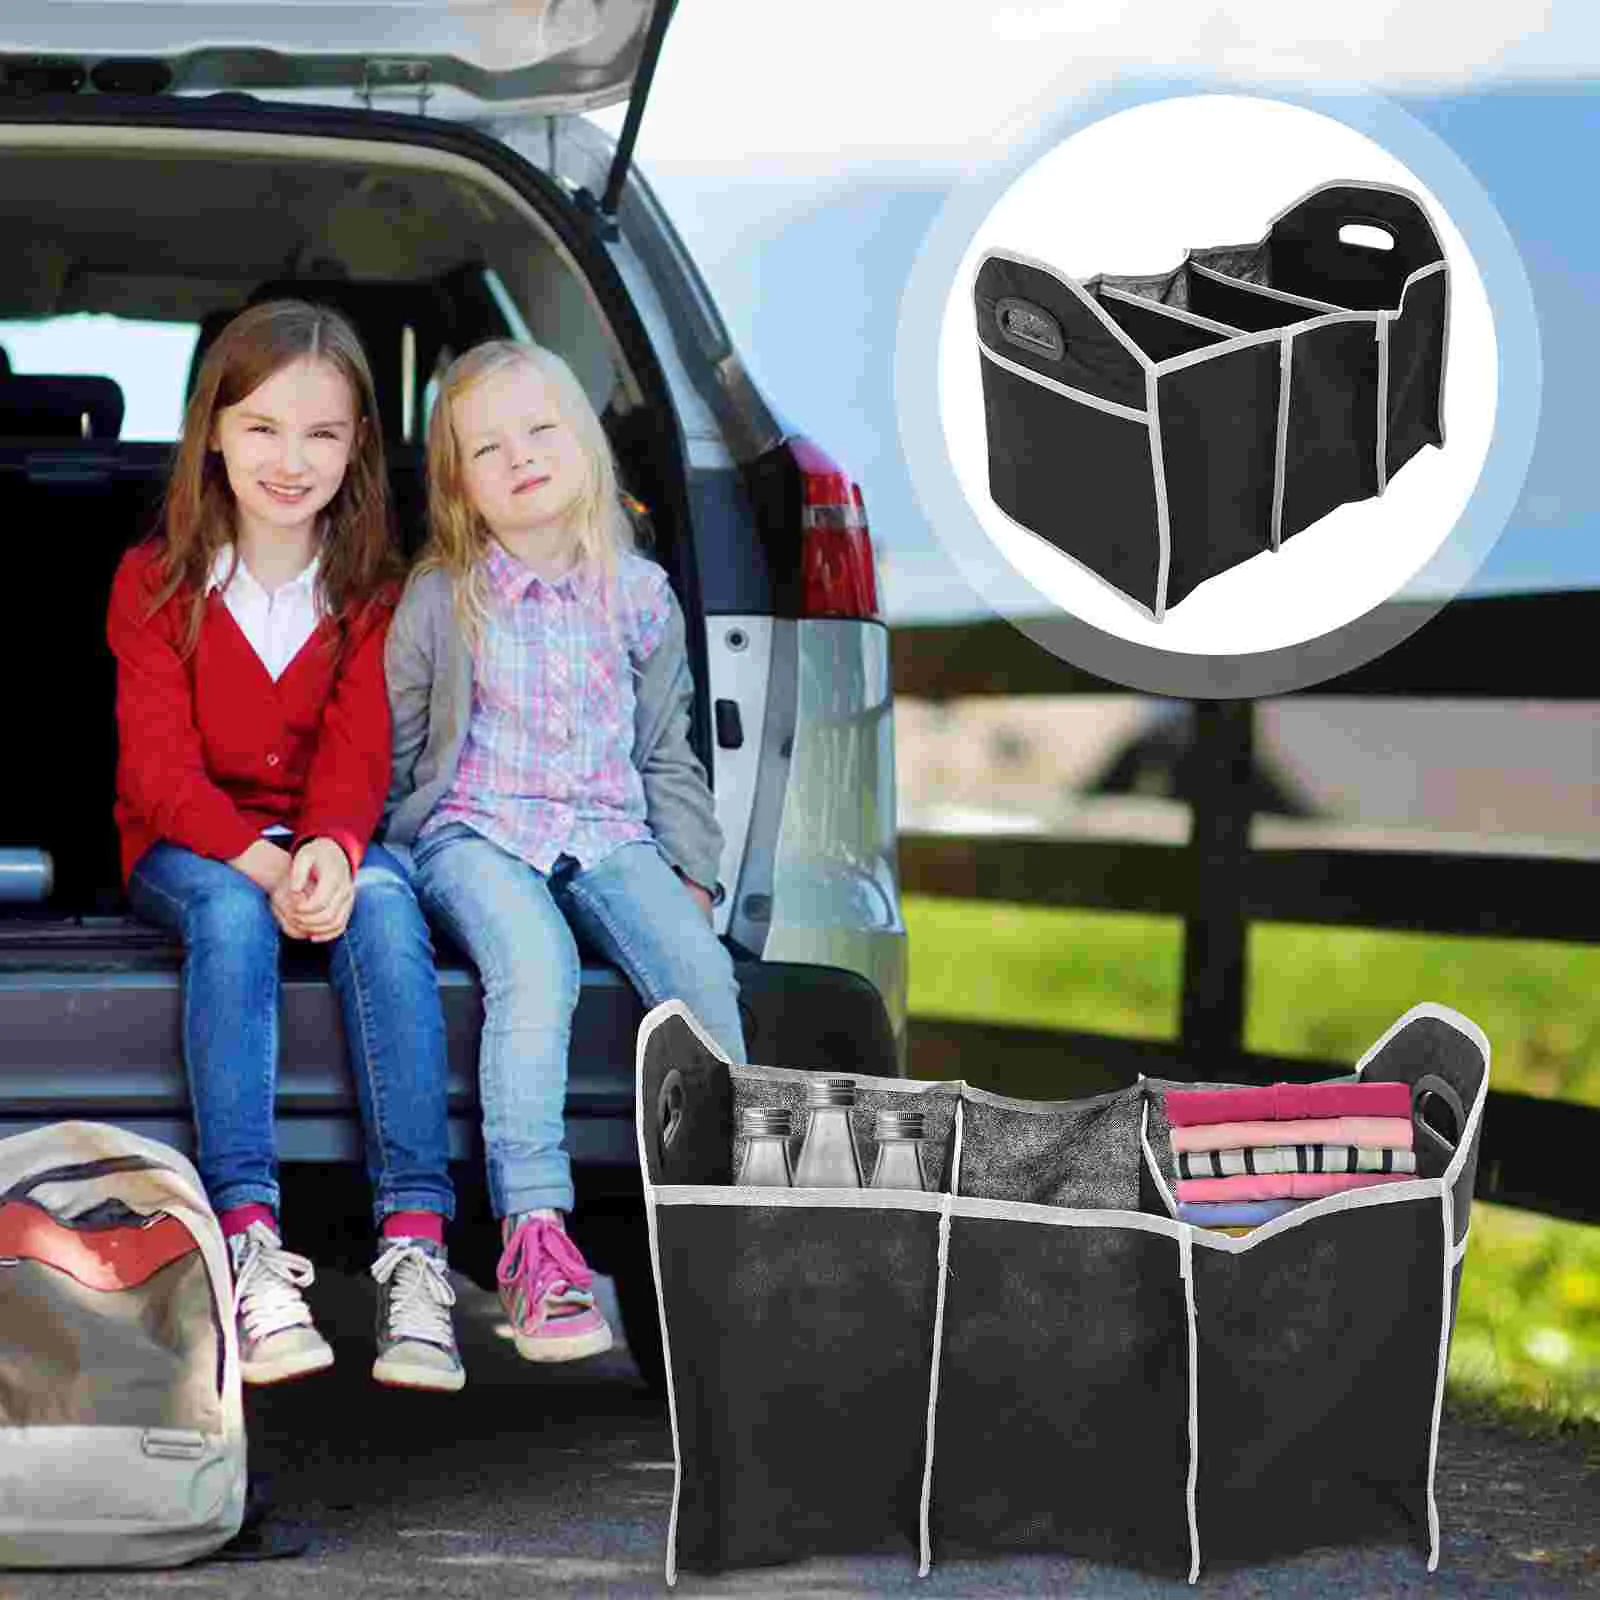 

Storage Organizer Trunk Car Cargo Organizers Foldable Vehicle Containers Box Collapsible Portable Insulation Suv Cooler Net